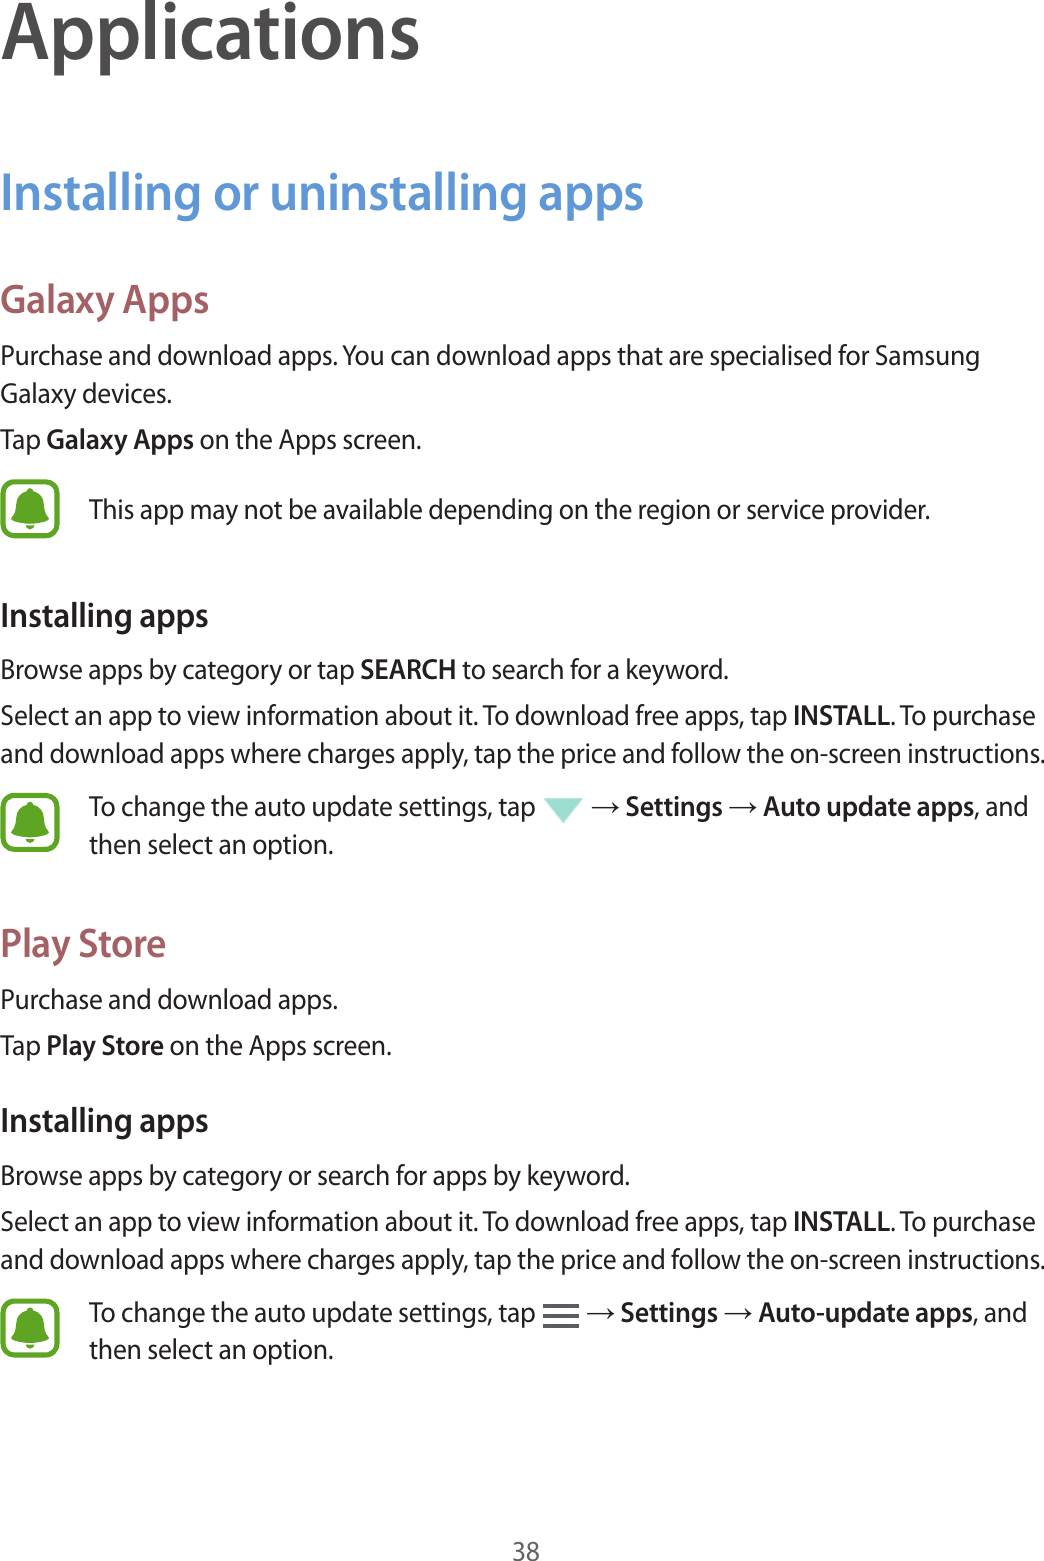 38ApplicationsInstalling or uninstalling appsGalaxy AppsPurchase and download apps. You can download apps that are specialised for Samsung Galaxy devices.Tap Galaxy Apps on the Apps screen.This app may not be available depending on the region or service provider.Installing appsBrowse apps by category or tap SEARCH to search for a keyword.Select an app to view information about it. To download free apps, tap INSTALL. To purchase and download apps where charges apply, tap the price and follow the on-screen instructions.To change the auto update settings, tap   → Settings → Auto update apps, and then select an option.Play StorePurchase and download apps.Tap Play Store on the Apps screen.Installing appsBrowse apps by category or search for apps by keyword.Select an app to view information about it. To download free apps, tap INSTALL. To purchase and download apps where charges apply, tap the price and follow the on-screen instructions.To change the auto update settings, tap   → Settings → Auto-update apps, and then select an option.